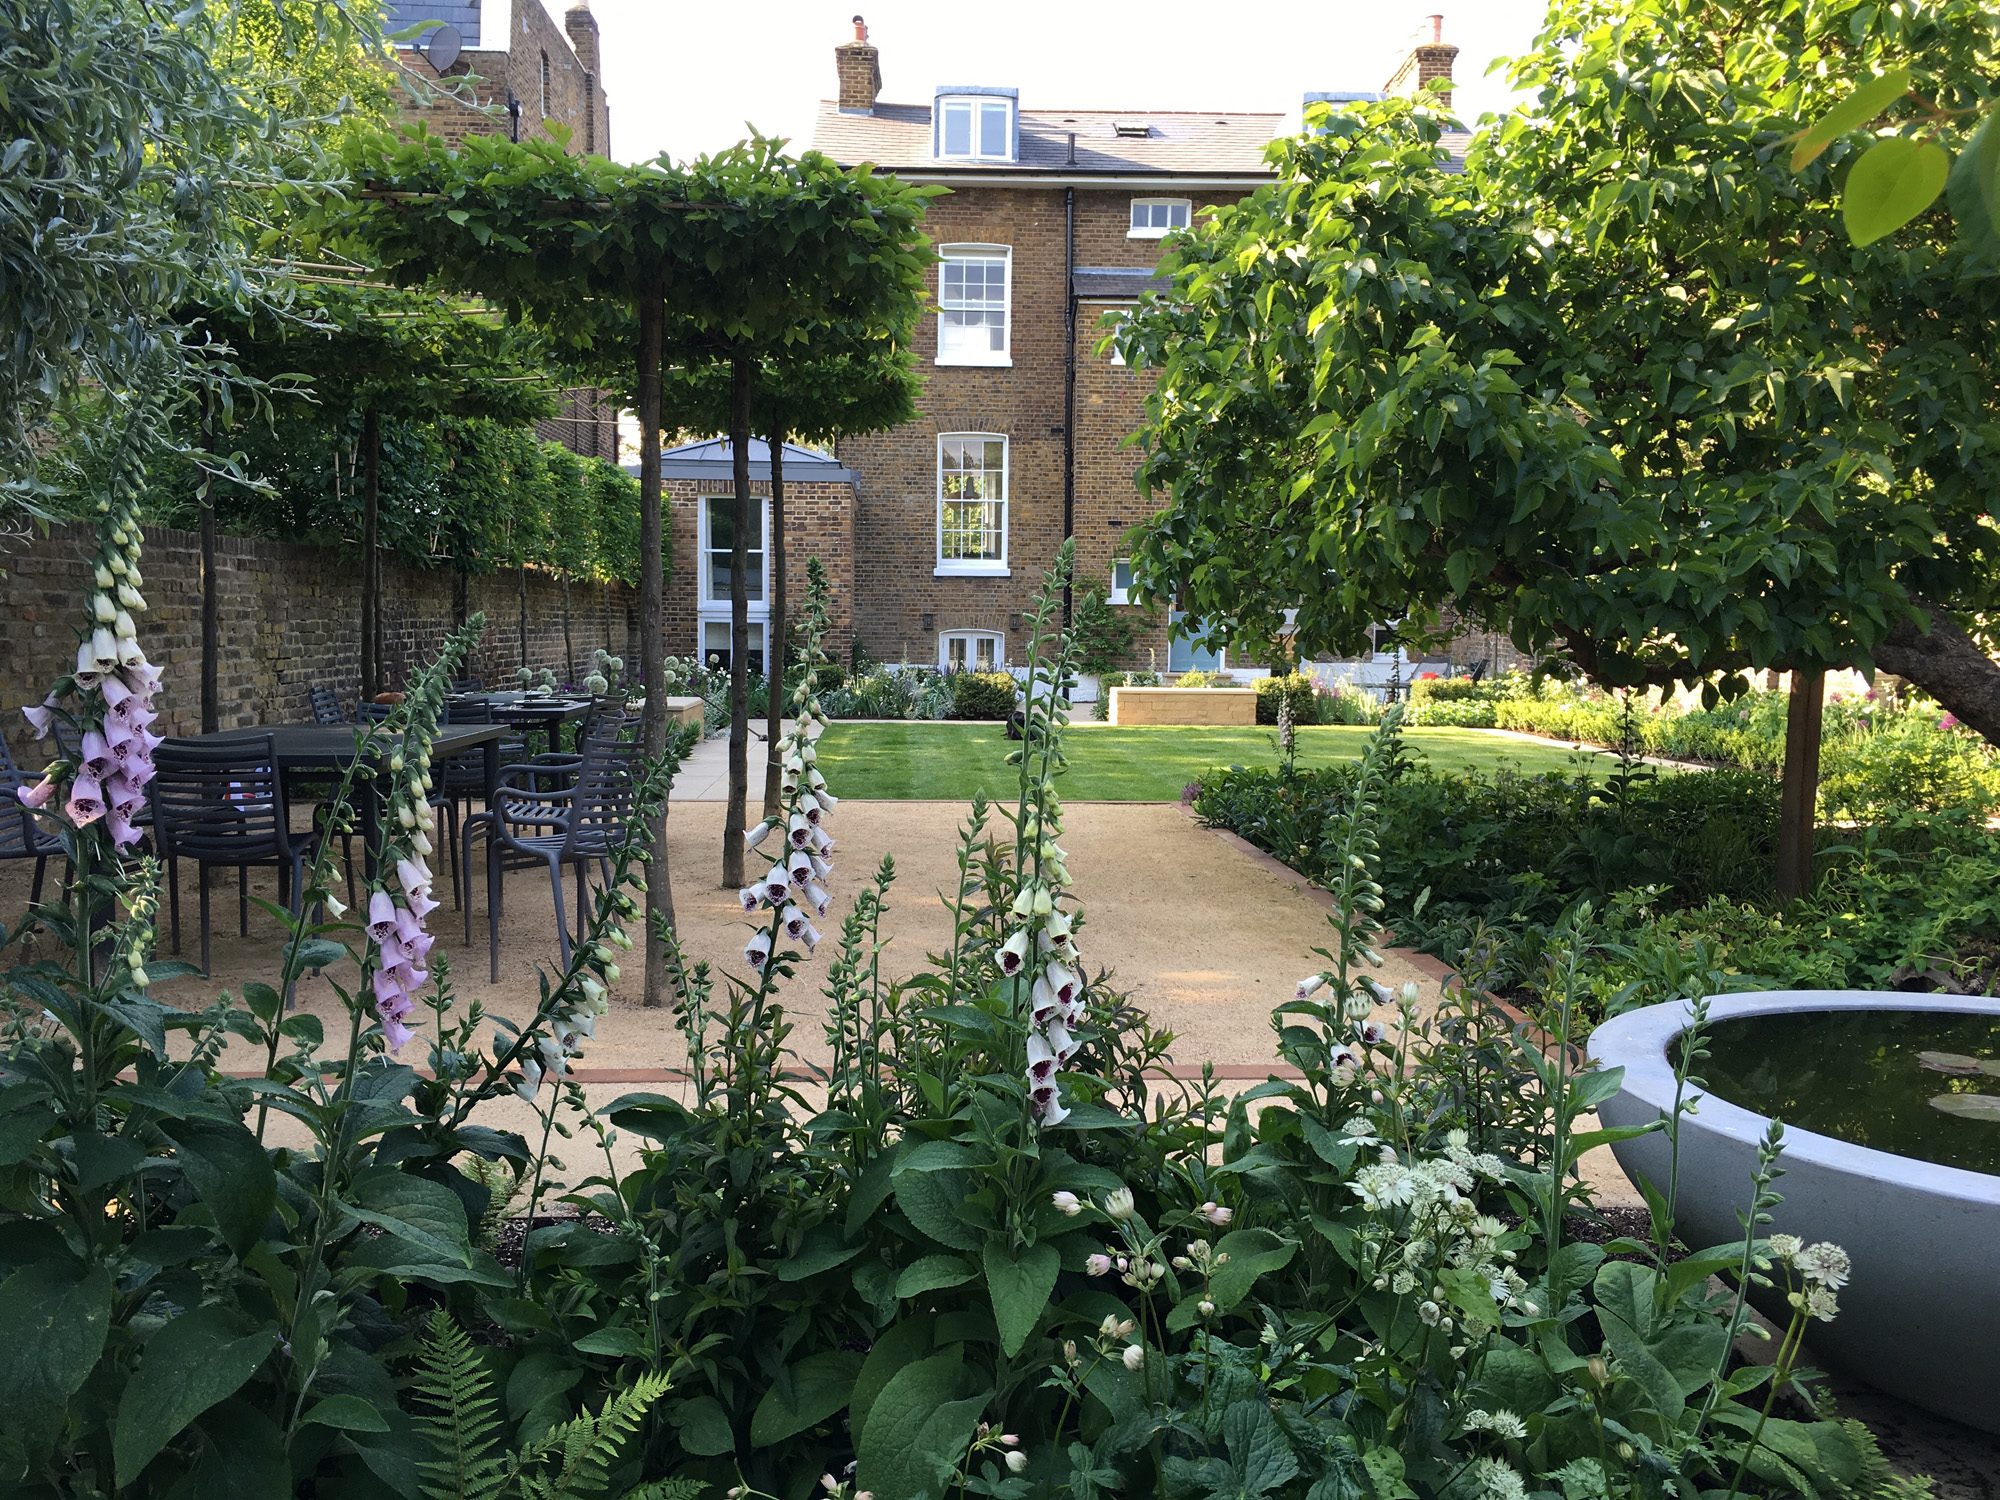 Highgate garden by Lucy Wilcox - contemporary landscape design in London